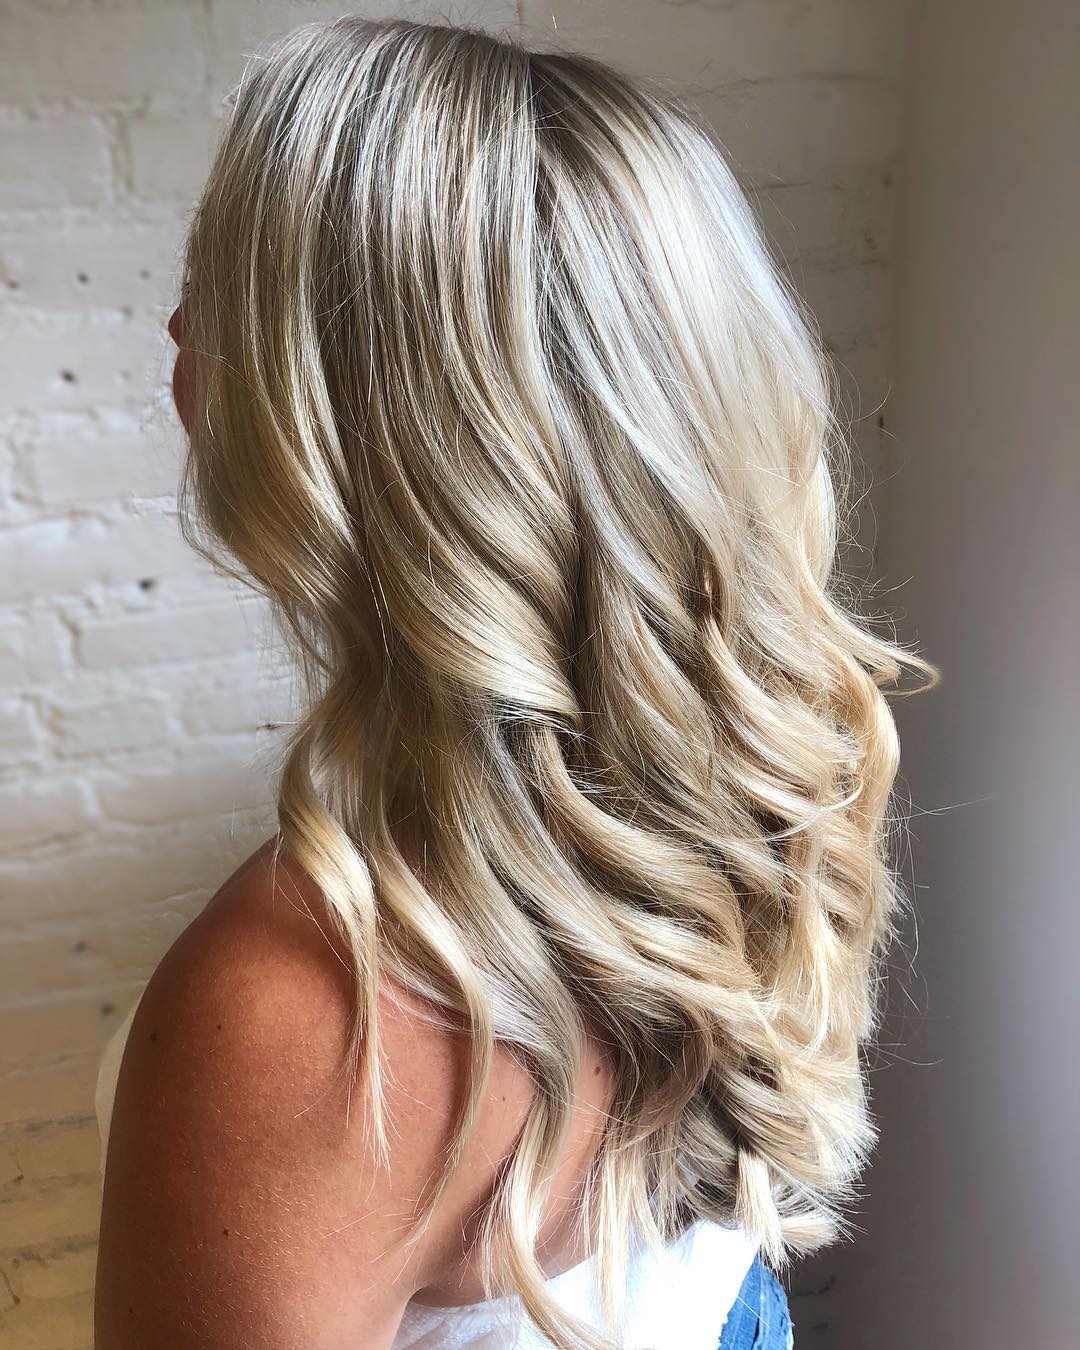 The Top 22 Dirty Blonde Hair Ideas for 2021 (Pictures)